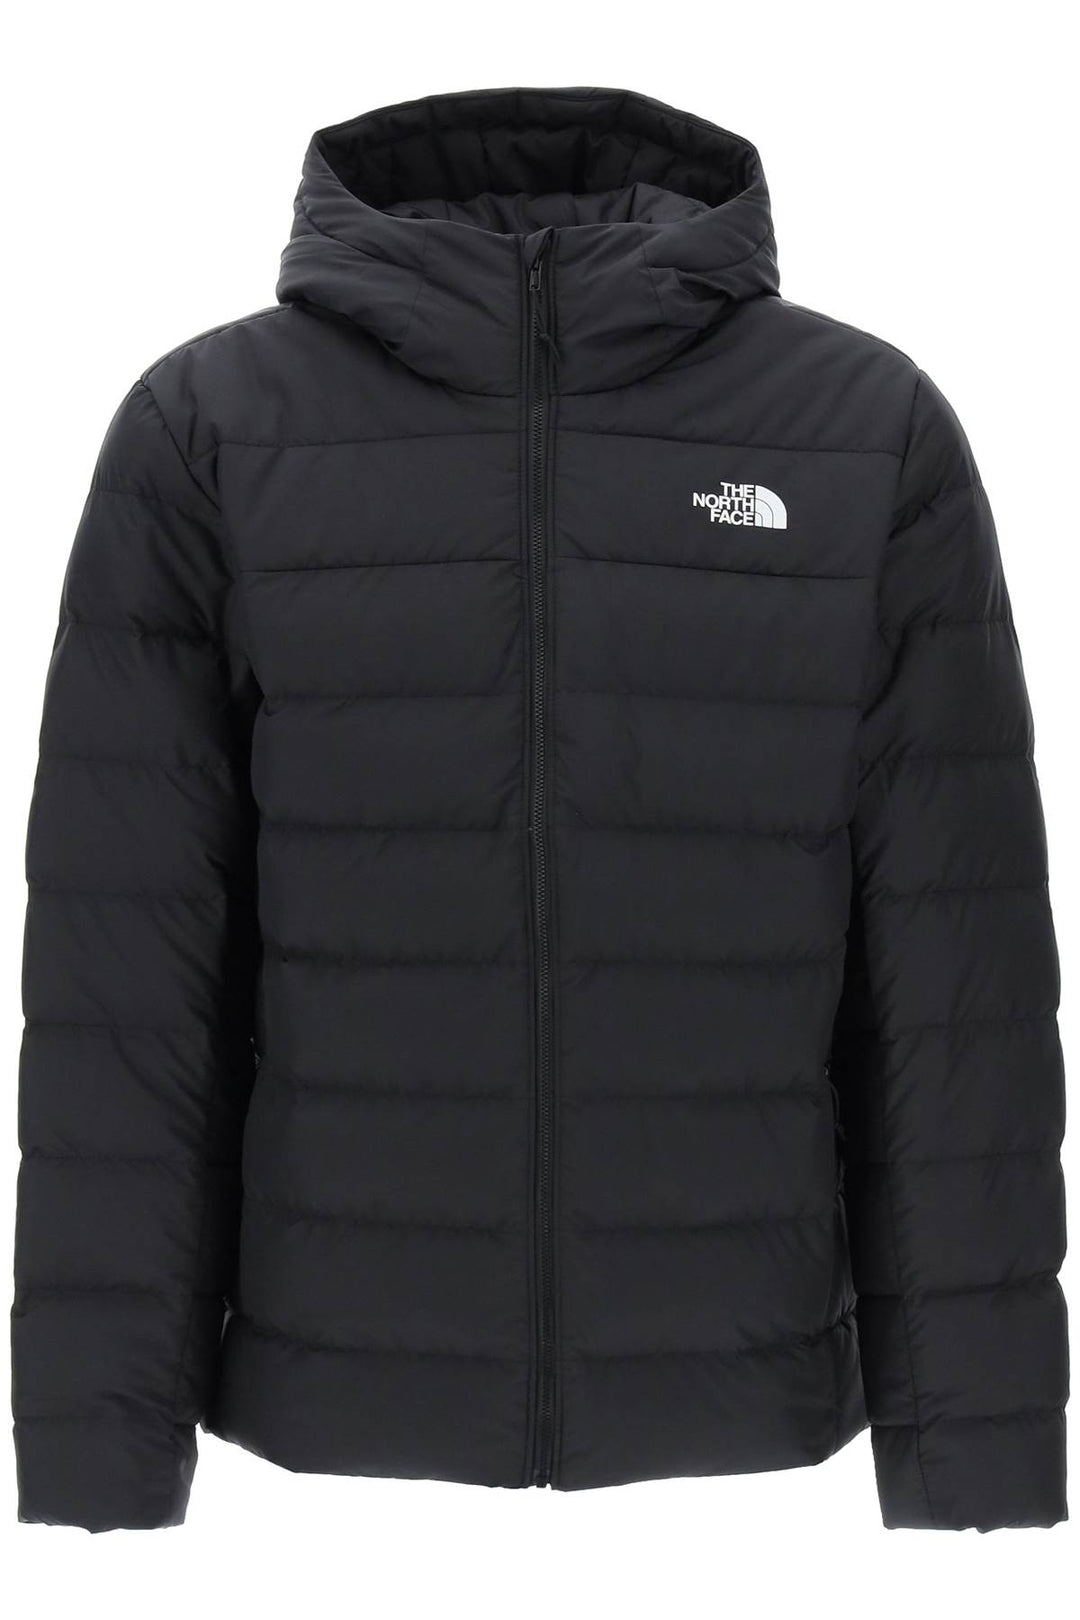 The north face aconcagua iii lightweight puffer jacket-0